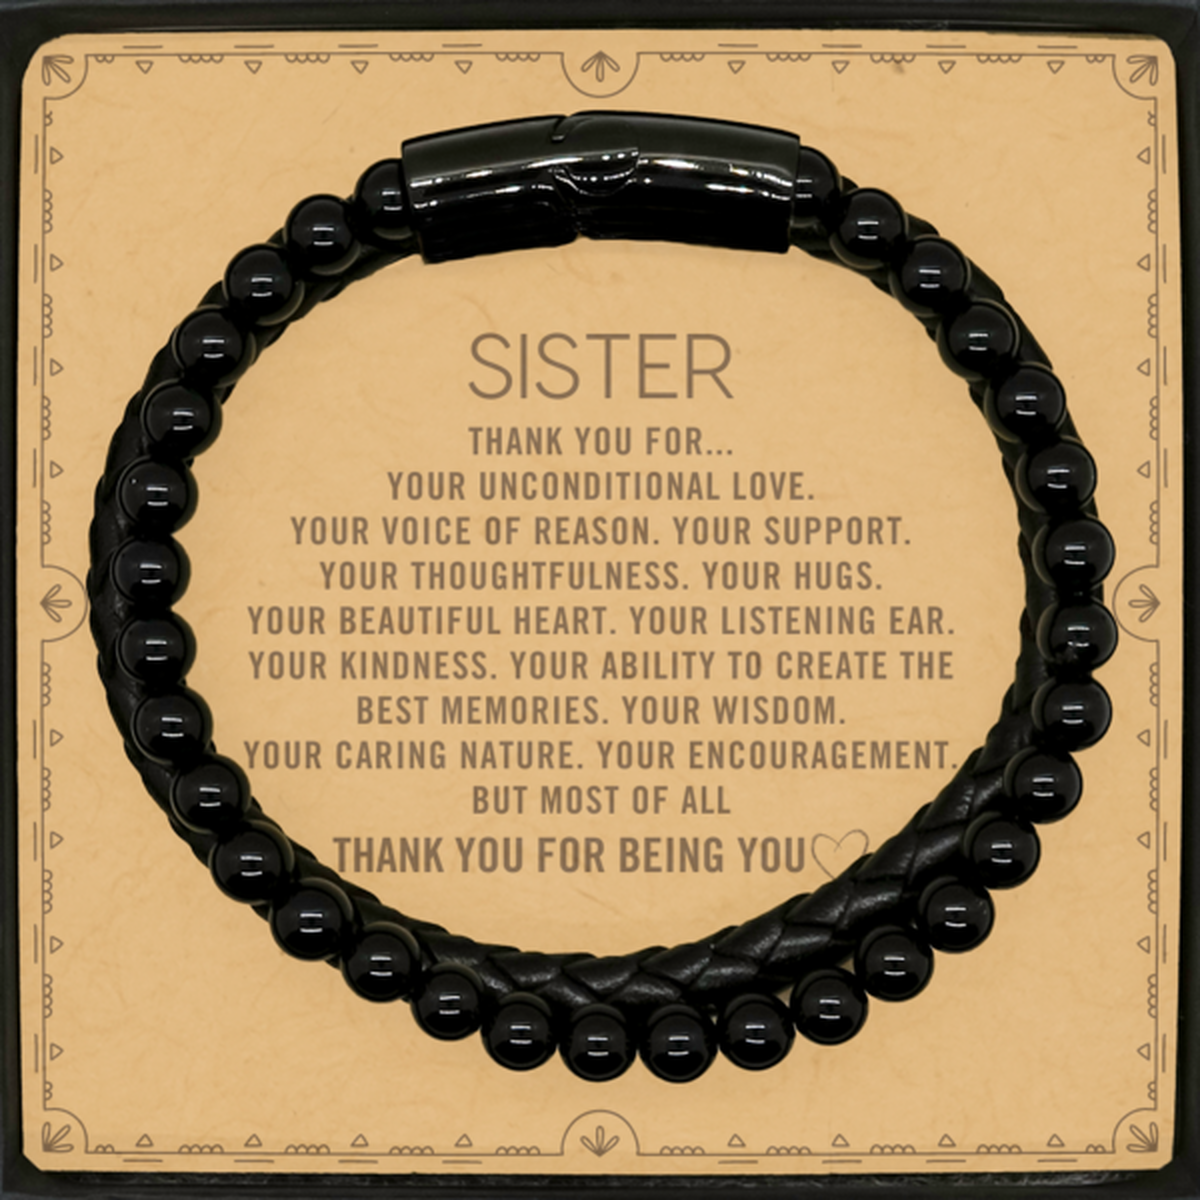 Sister Stone Leather Bracelets Custom, Message Card Gifts For Sister Christmas Graduation Birthday Gifts for Men Women Sister Thank you for Your unconditional love